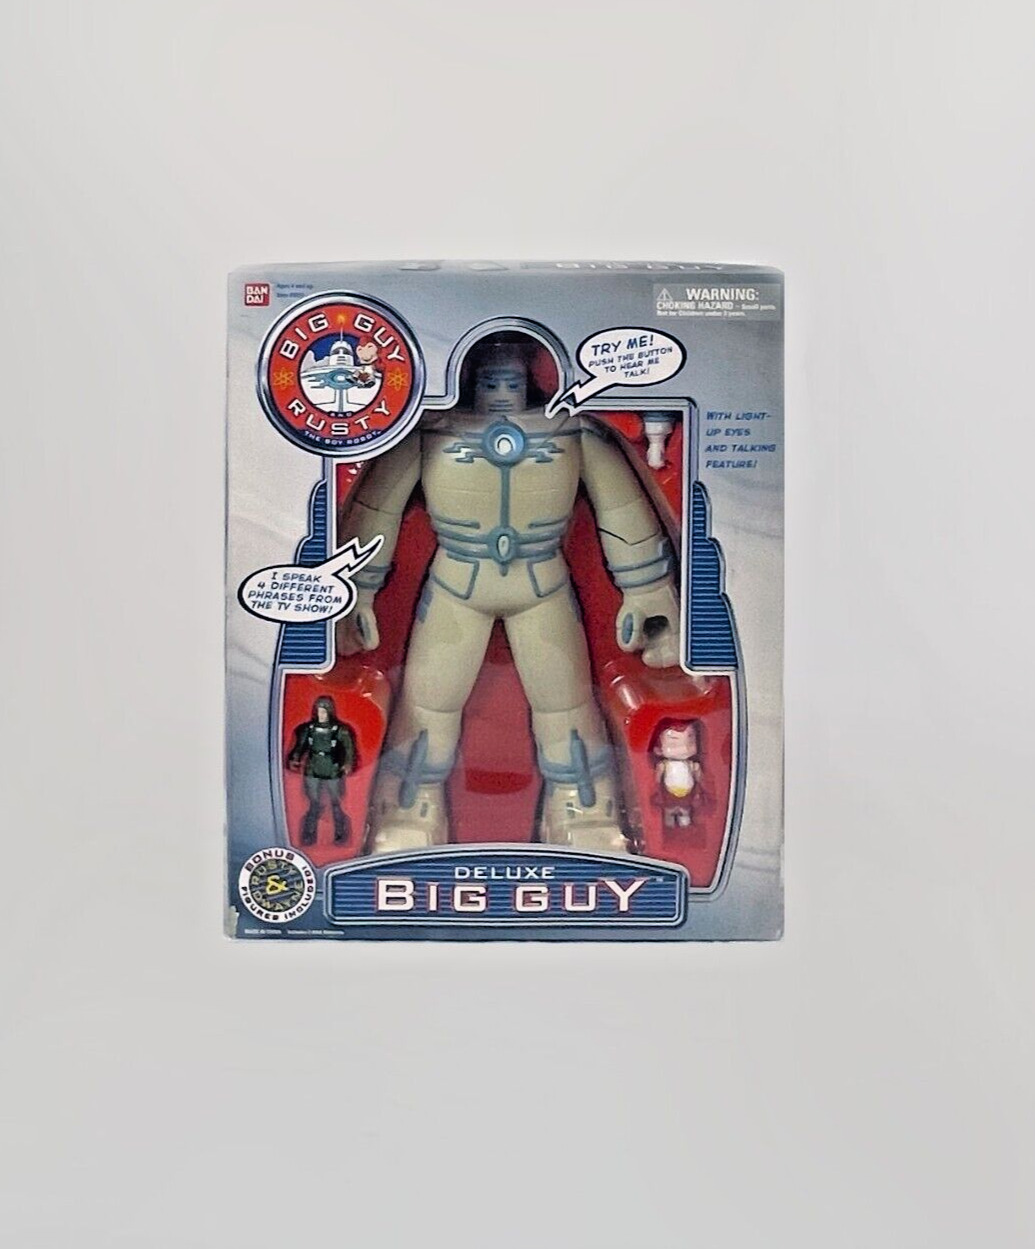 Vintage 1999 BANDAI Deluxe Big Guy and Rusty the Boy Robot - Still Works